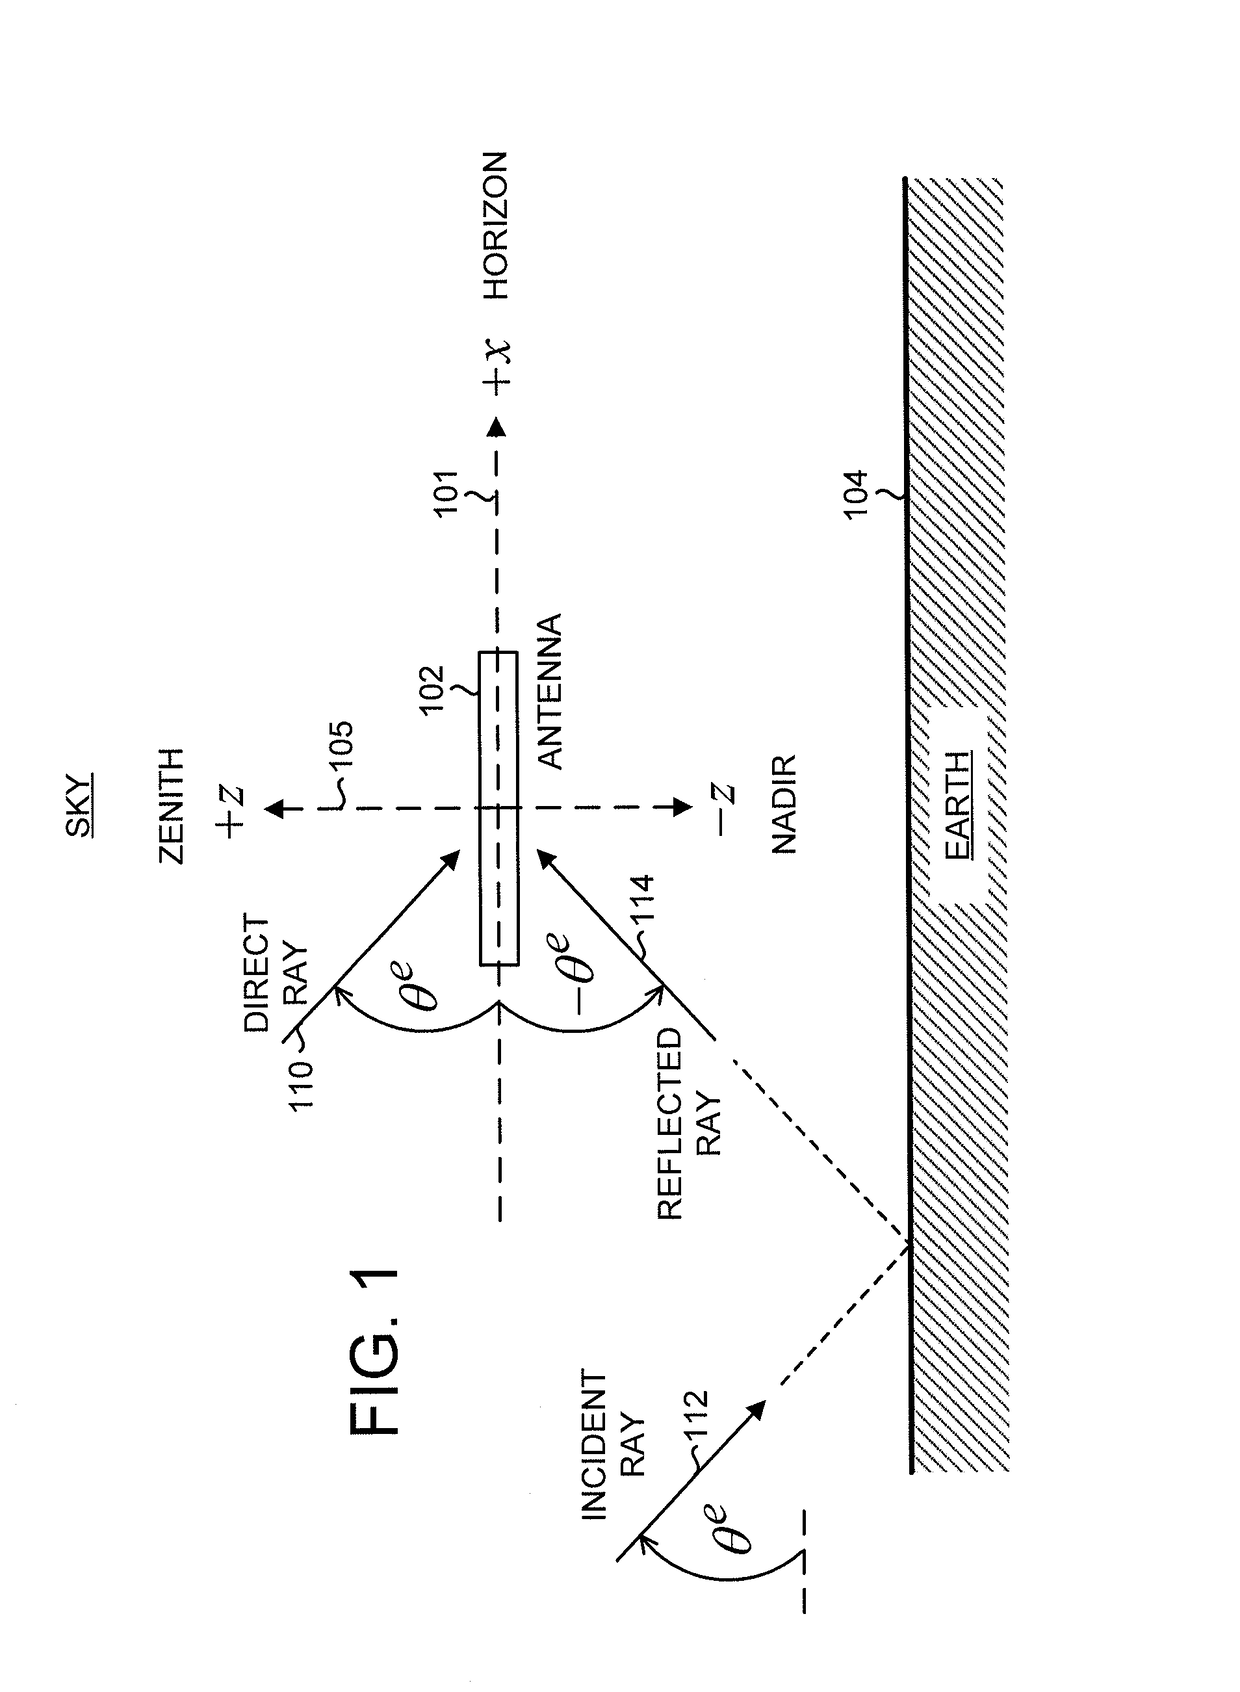 Ground planes for reducing multipath reception by antennas